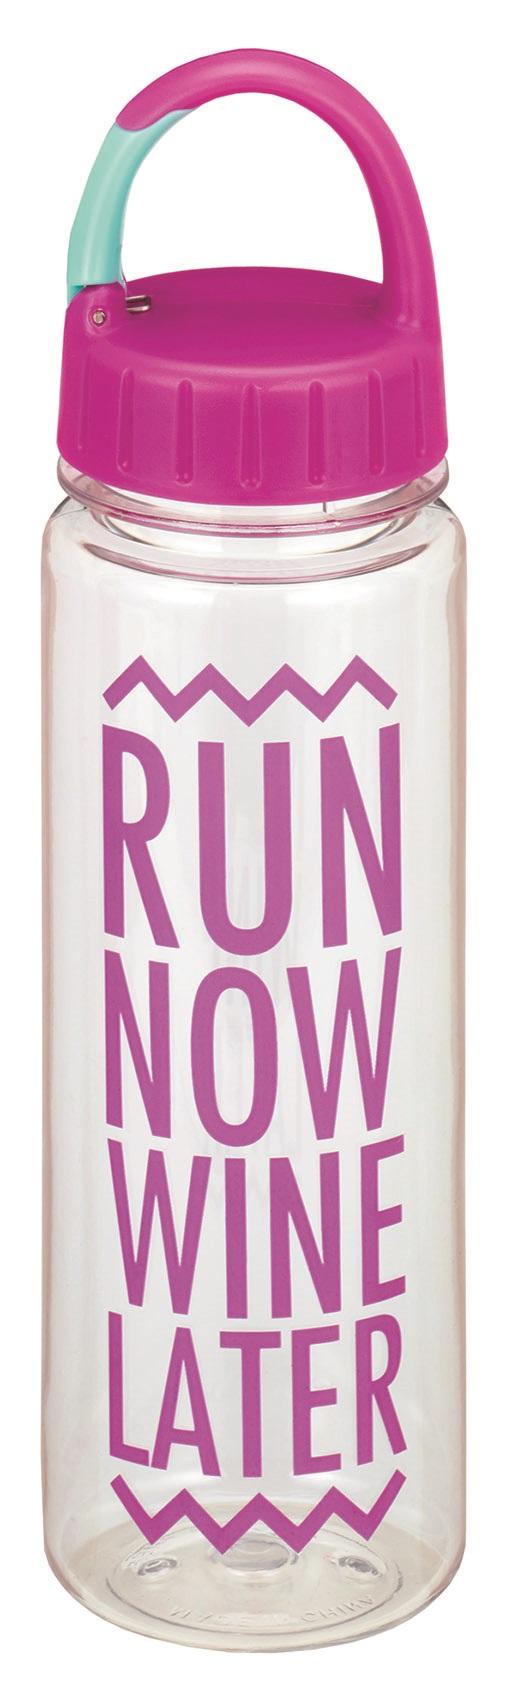 Paperchase, Run now wine later water bottle, £6.50